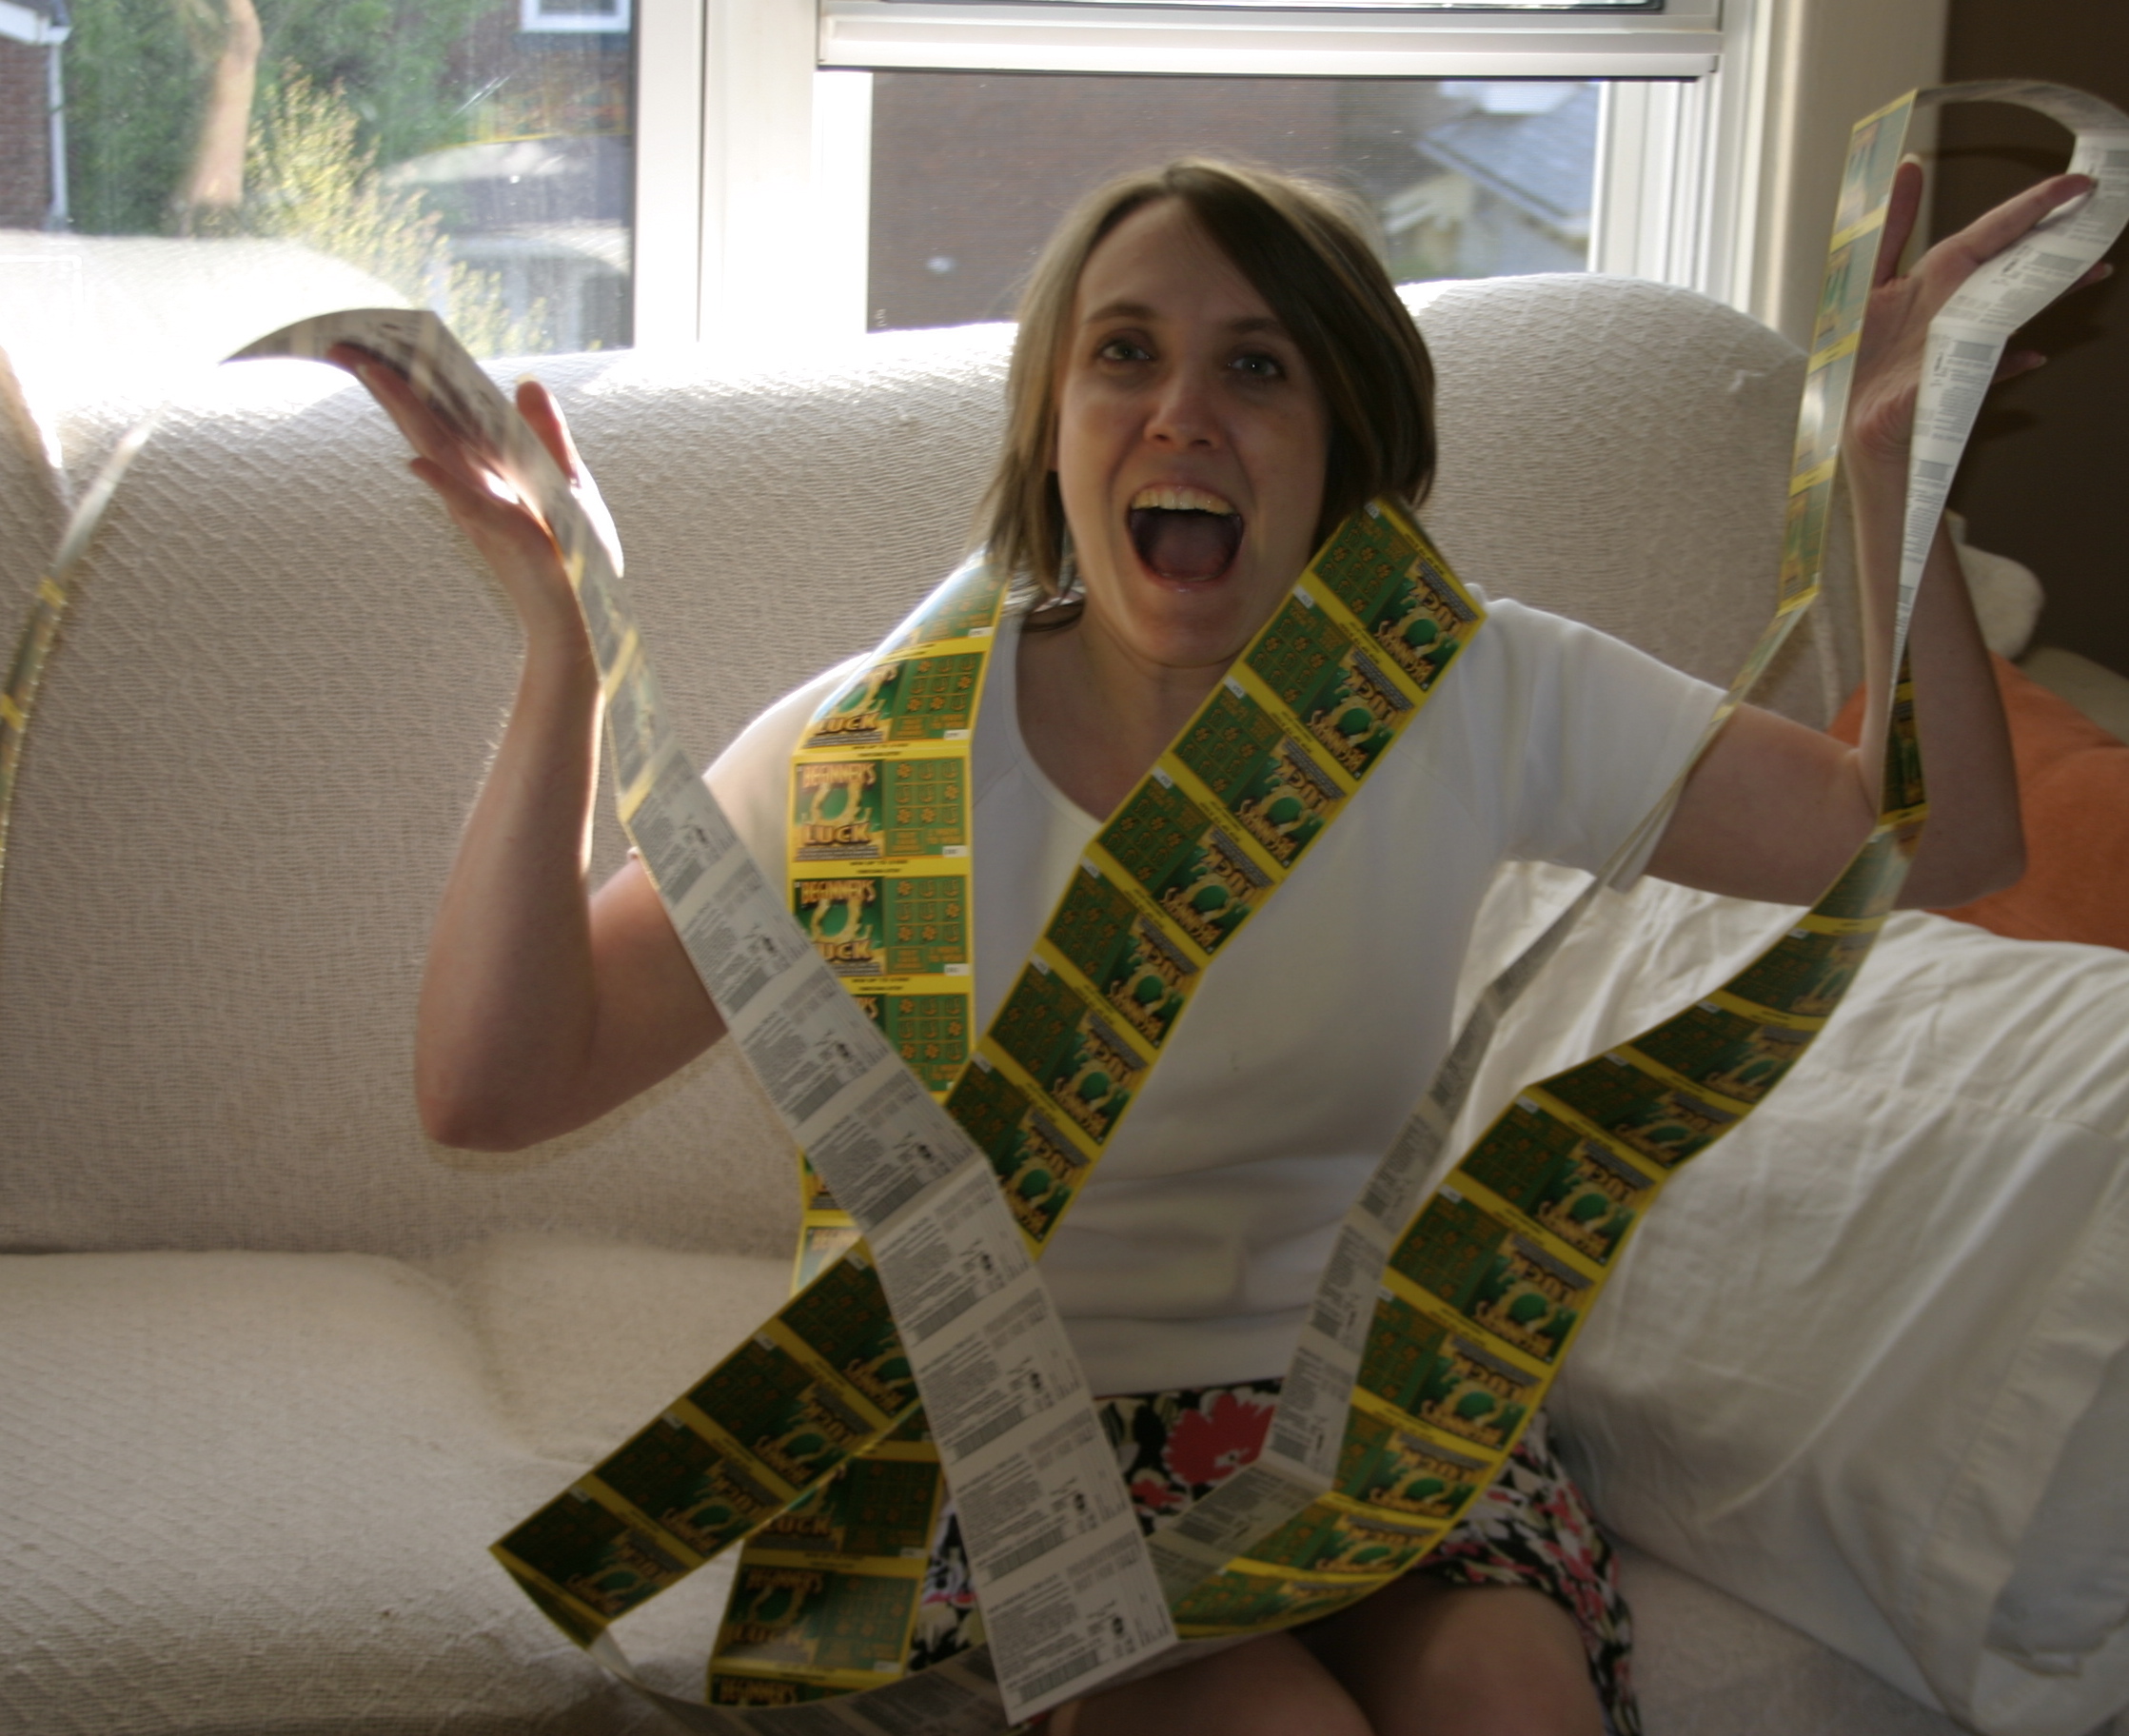 A white woman is wrapped in Lottery scratchers, with a big smile.